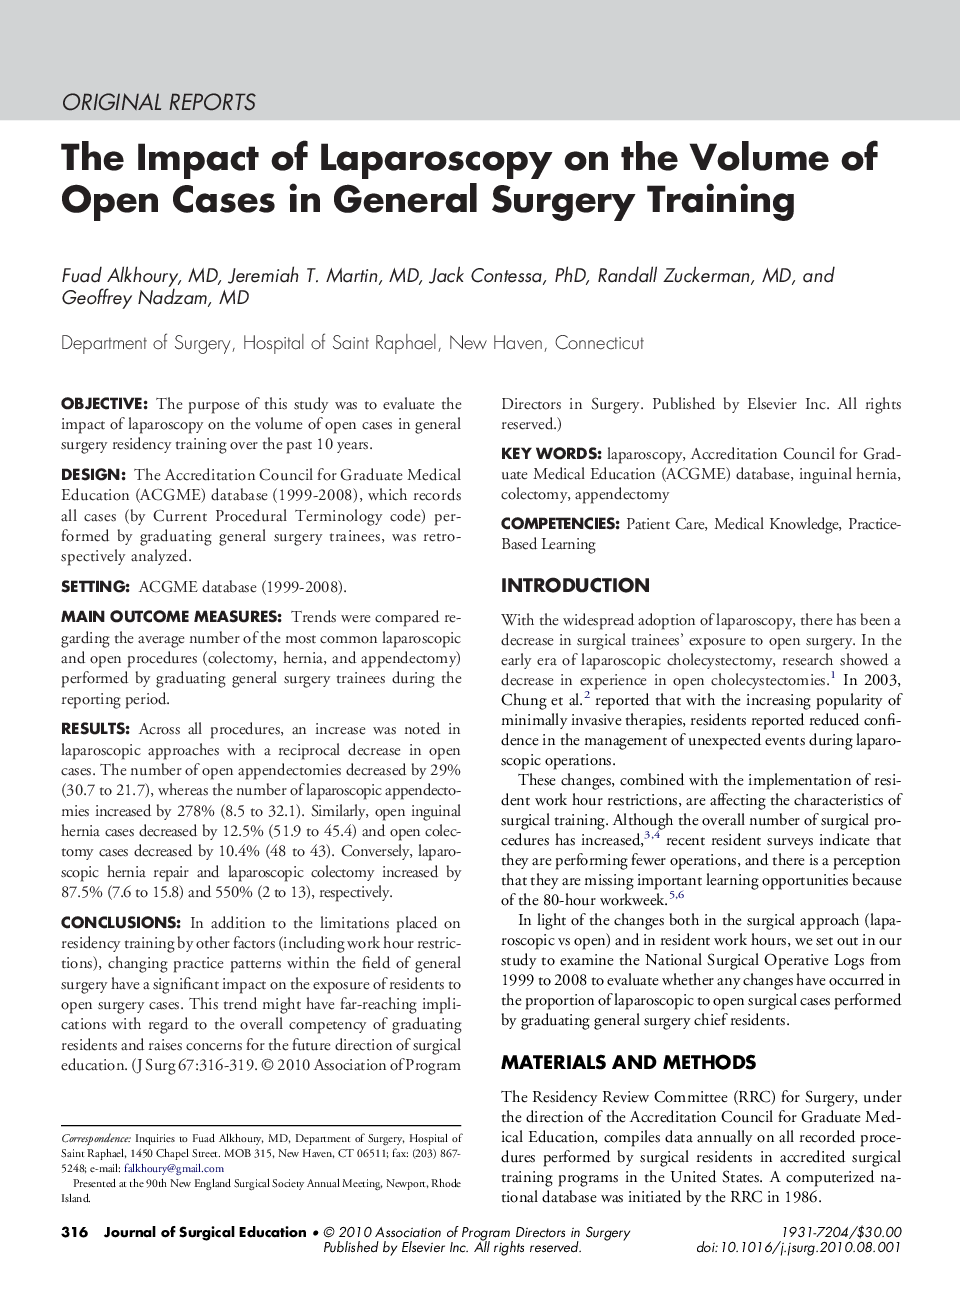 The Impact of Laparoscopy on the Volume of Open Cases in General Surgery Training